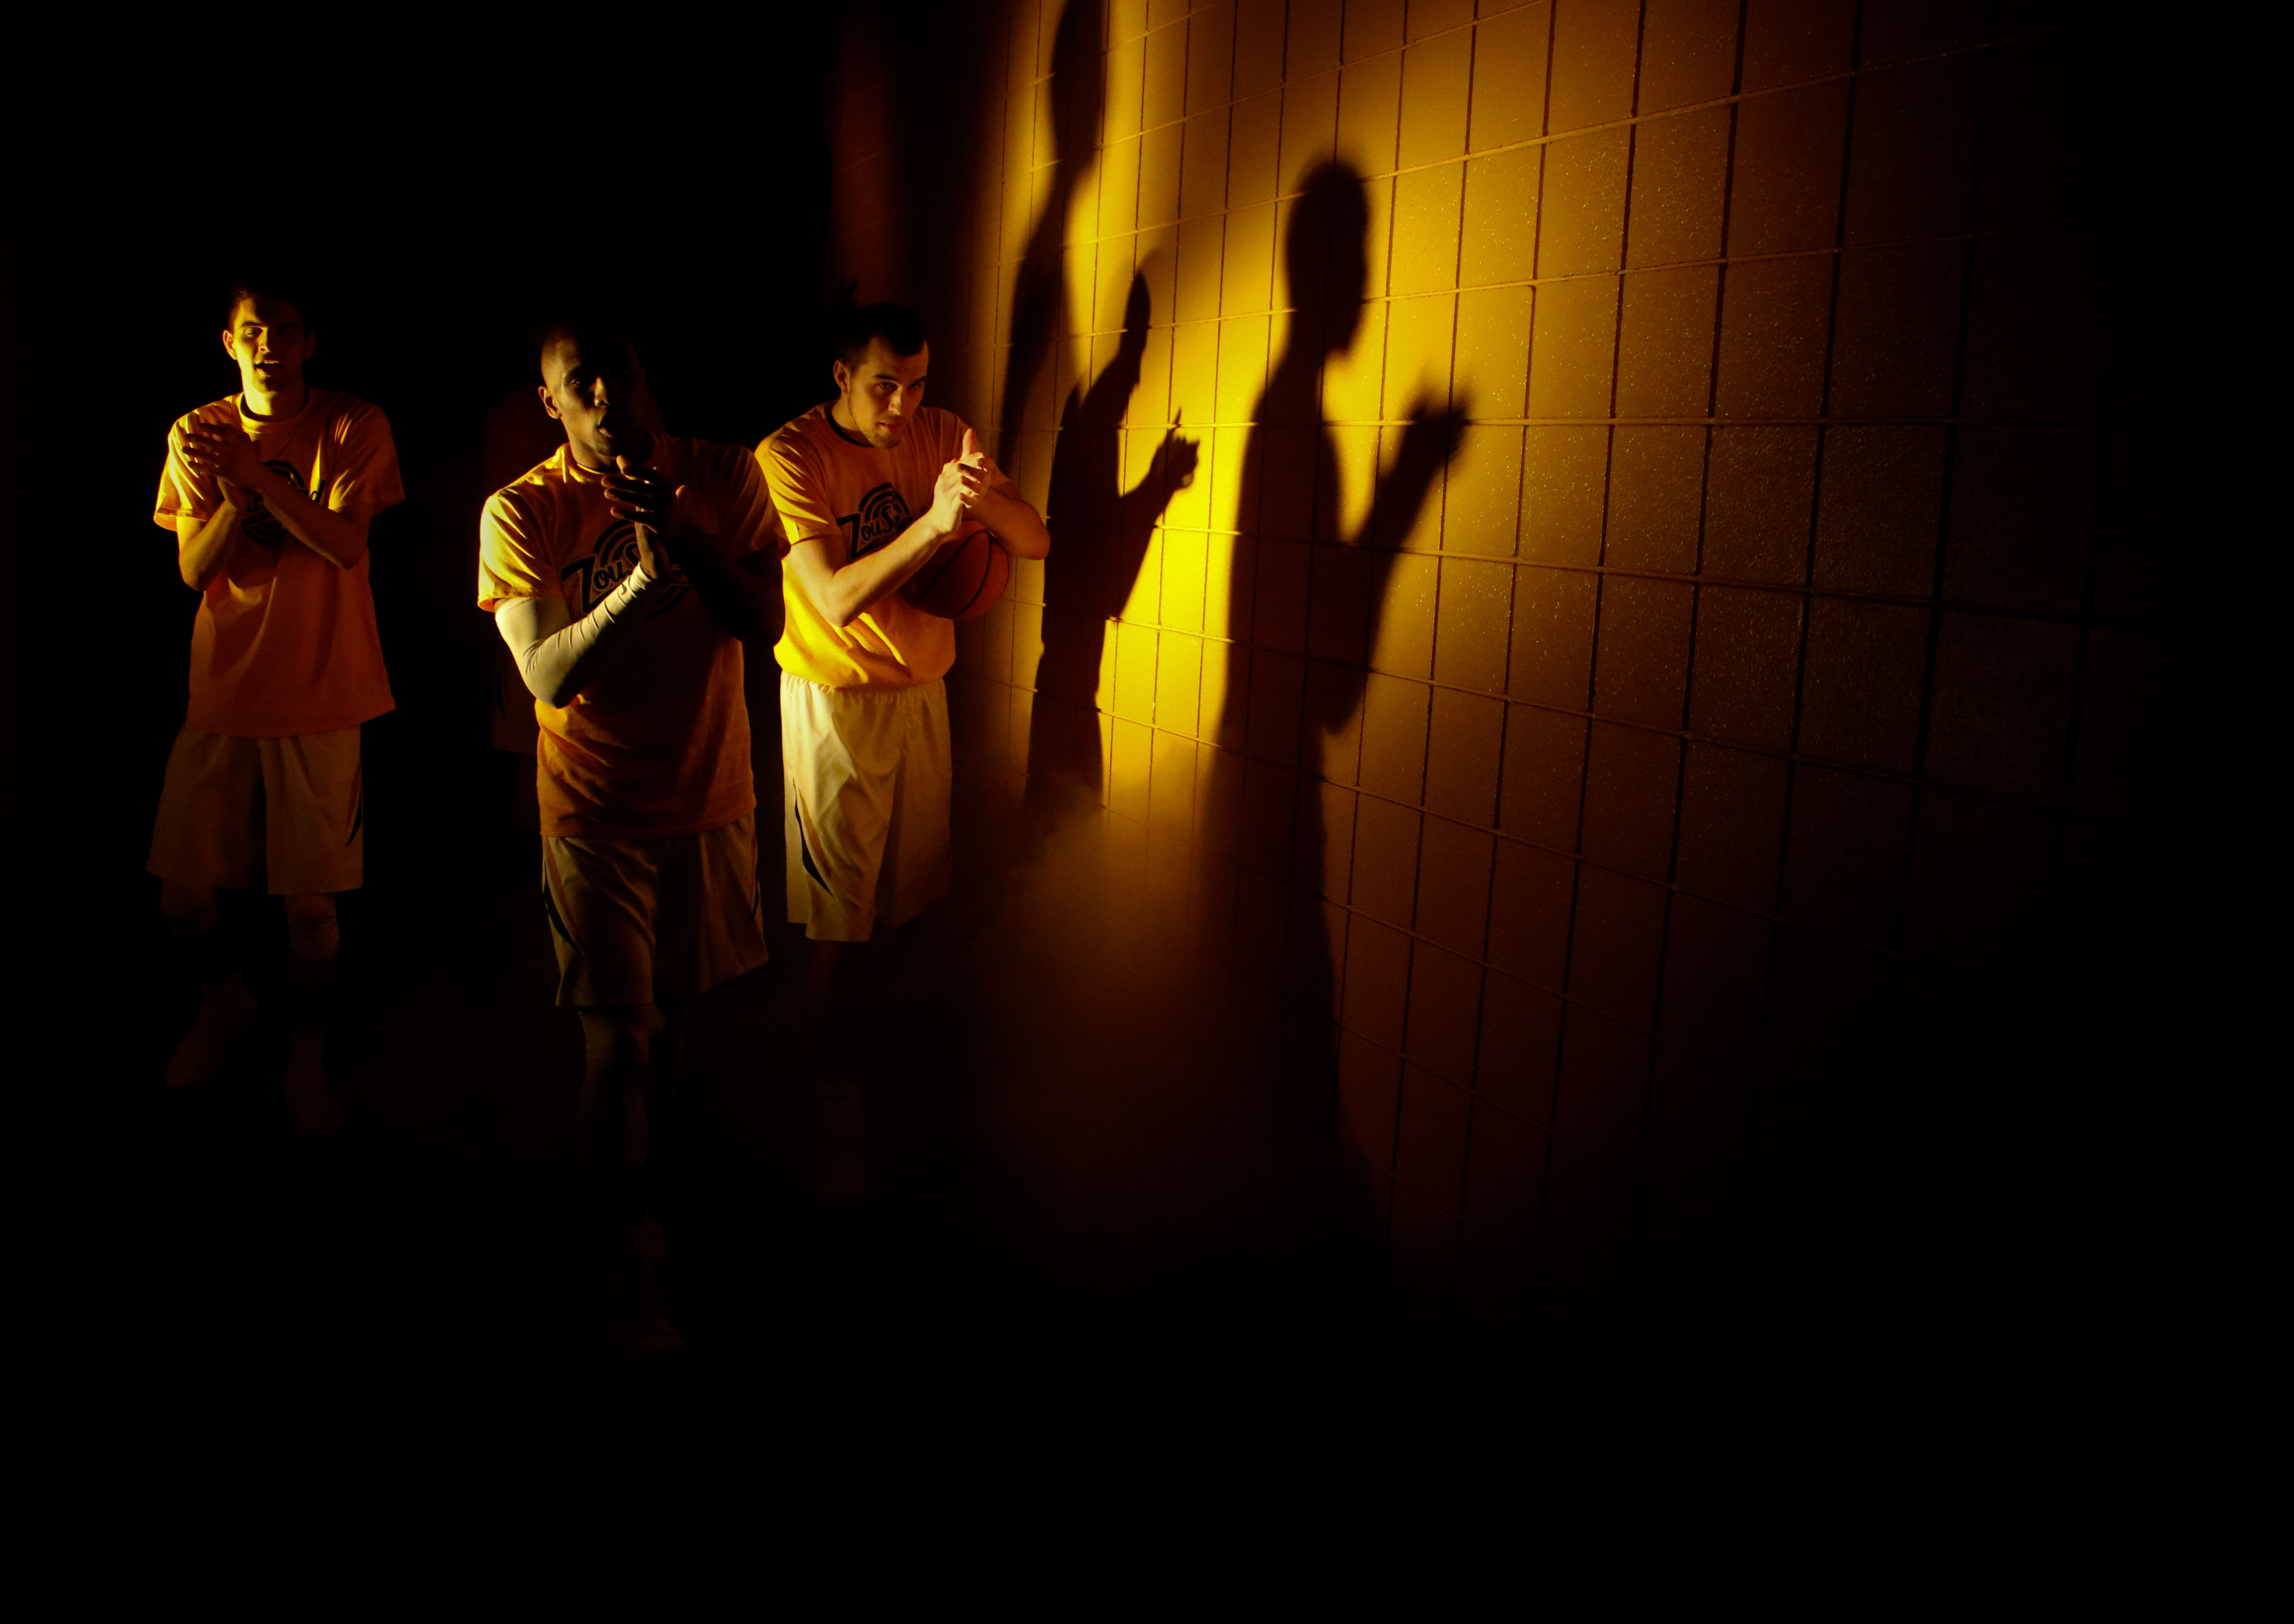 A trio of basketball players stand in beam of light casting their shadows against the wall.